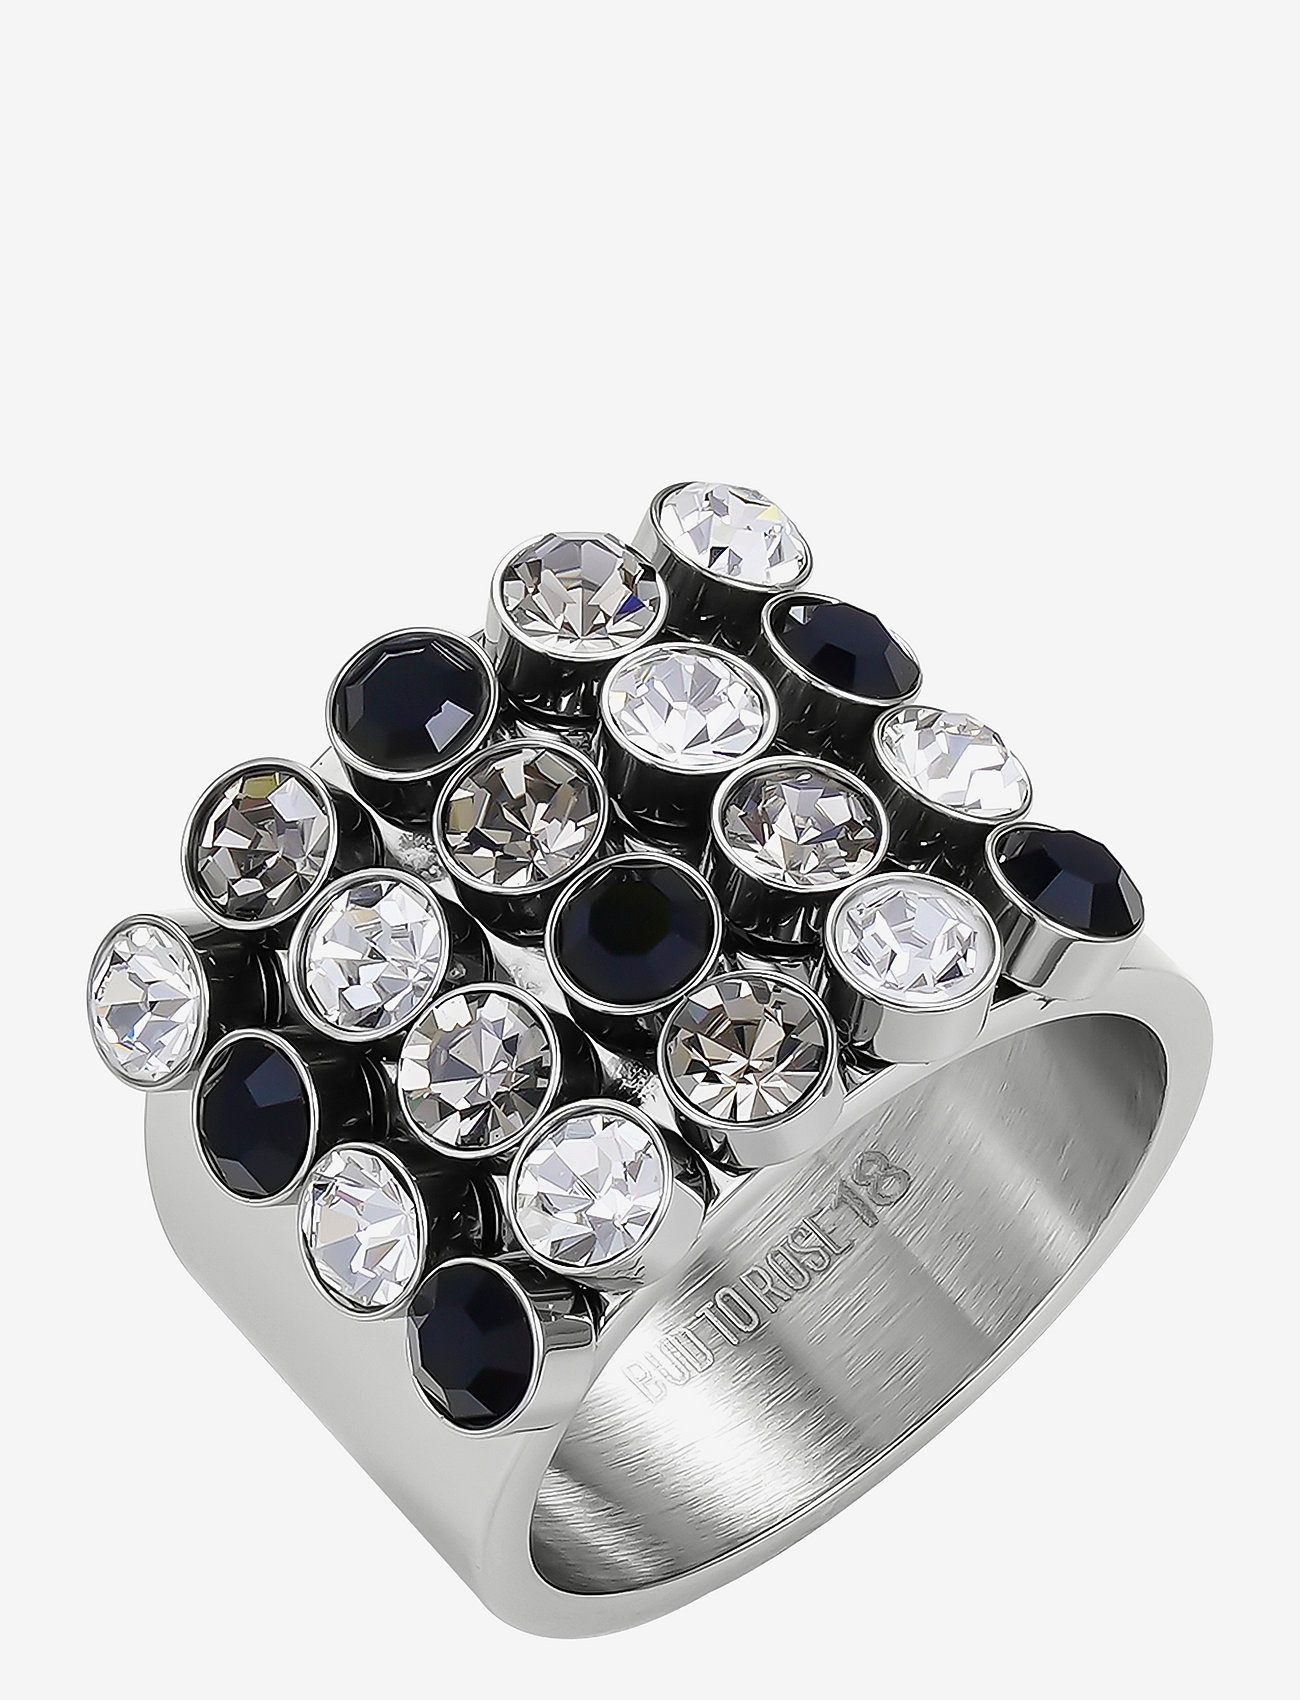 Bud to rose - Lima Large Ring - festmode zu outlet-preisen - silver - 0